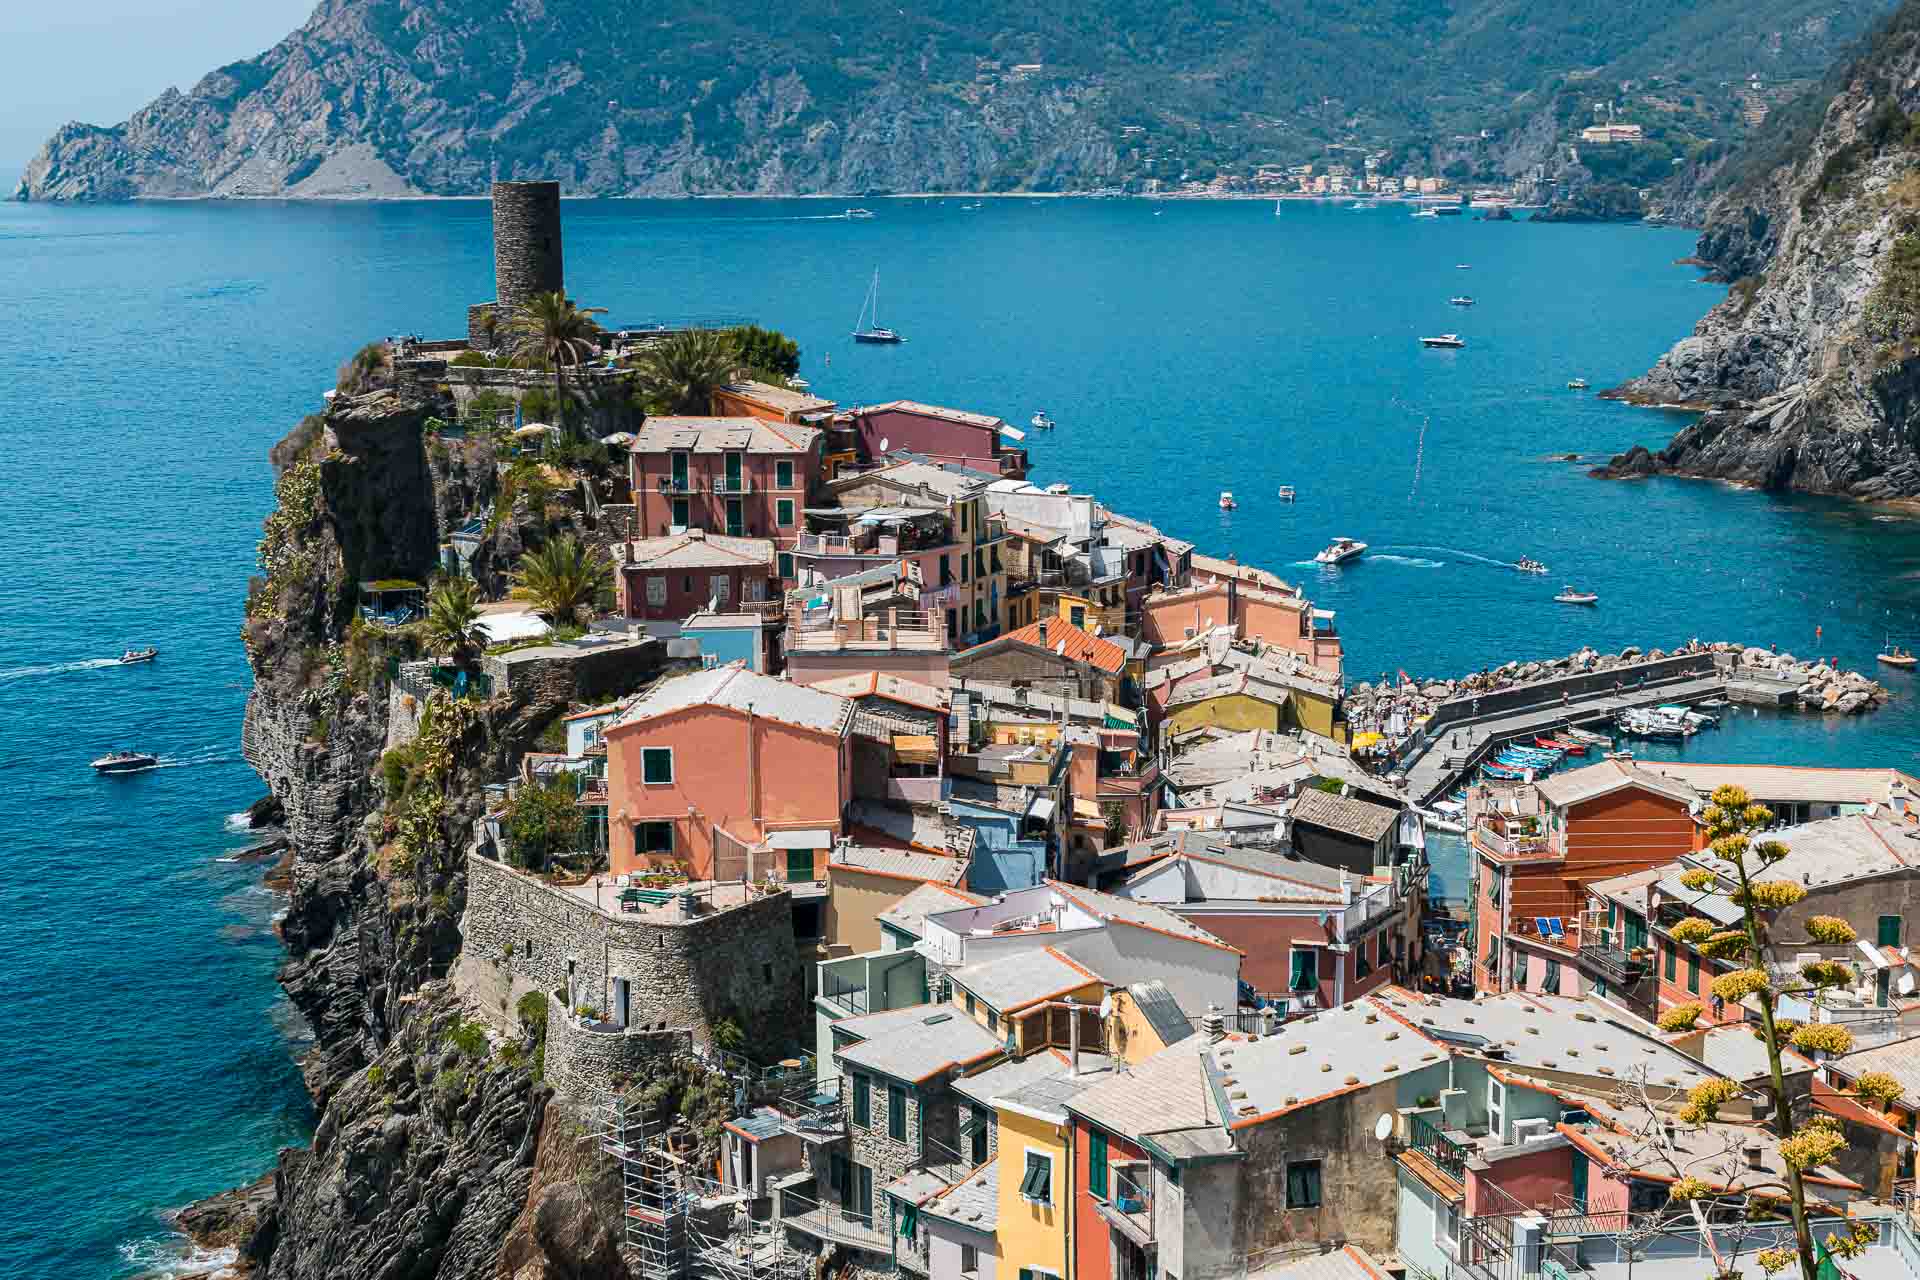 A village on top of a hill surrounded by the sea of the Cinque Terre